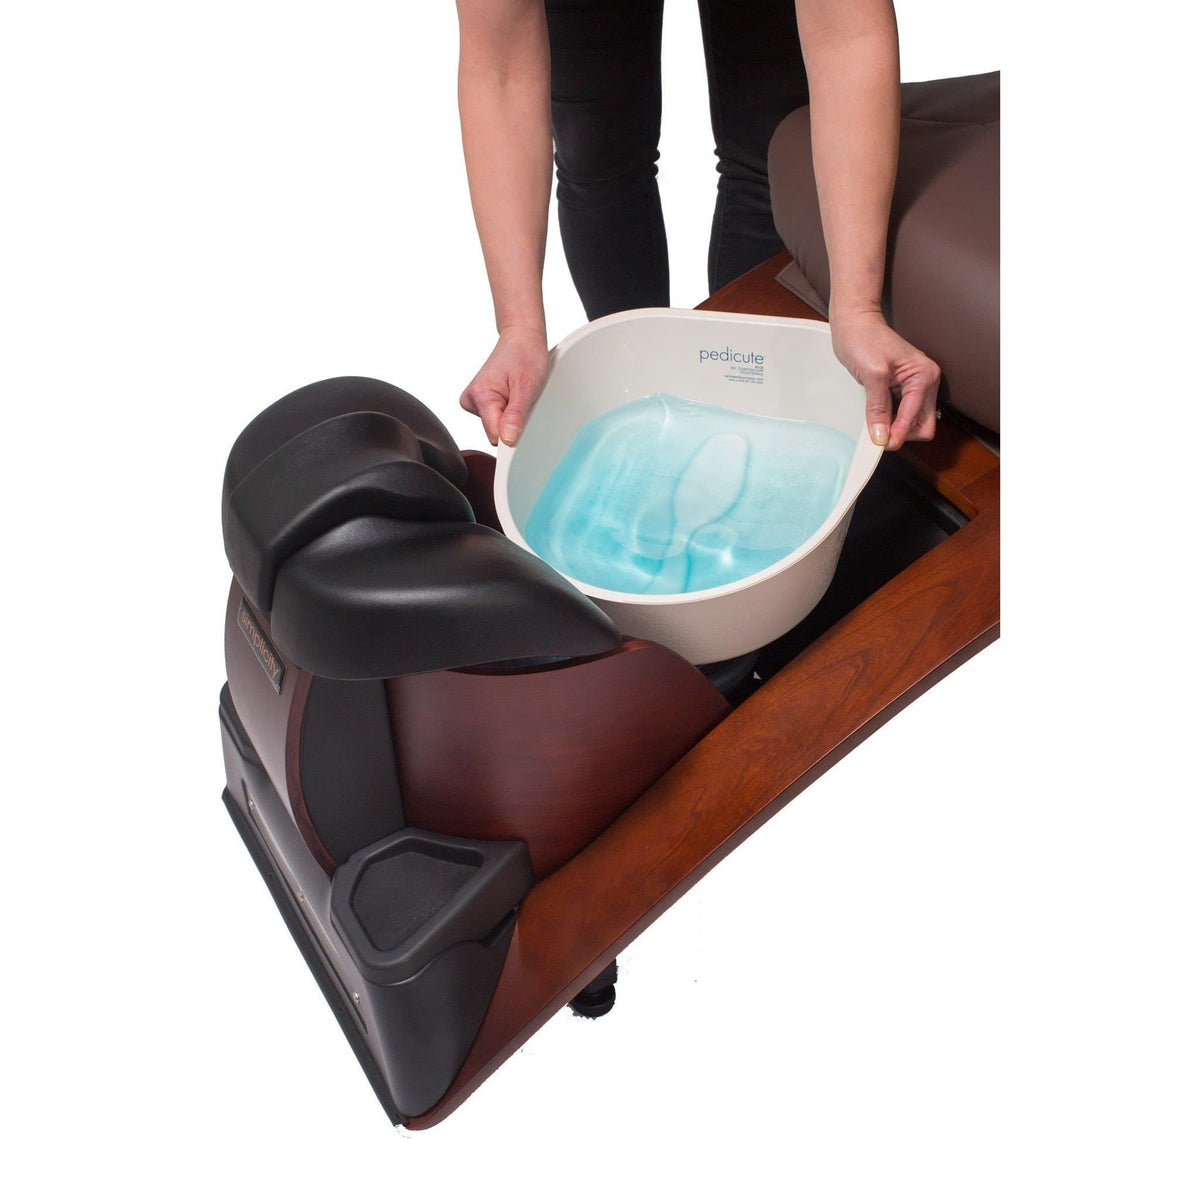 Continuum Continuum Simplicity LE Pedicure Spa Chair Pedicure &amp; Spa Chairs - ChairsThatGive